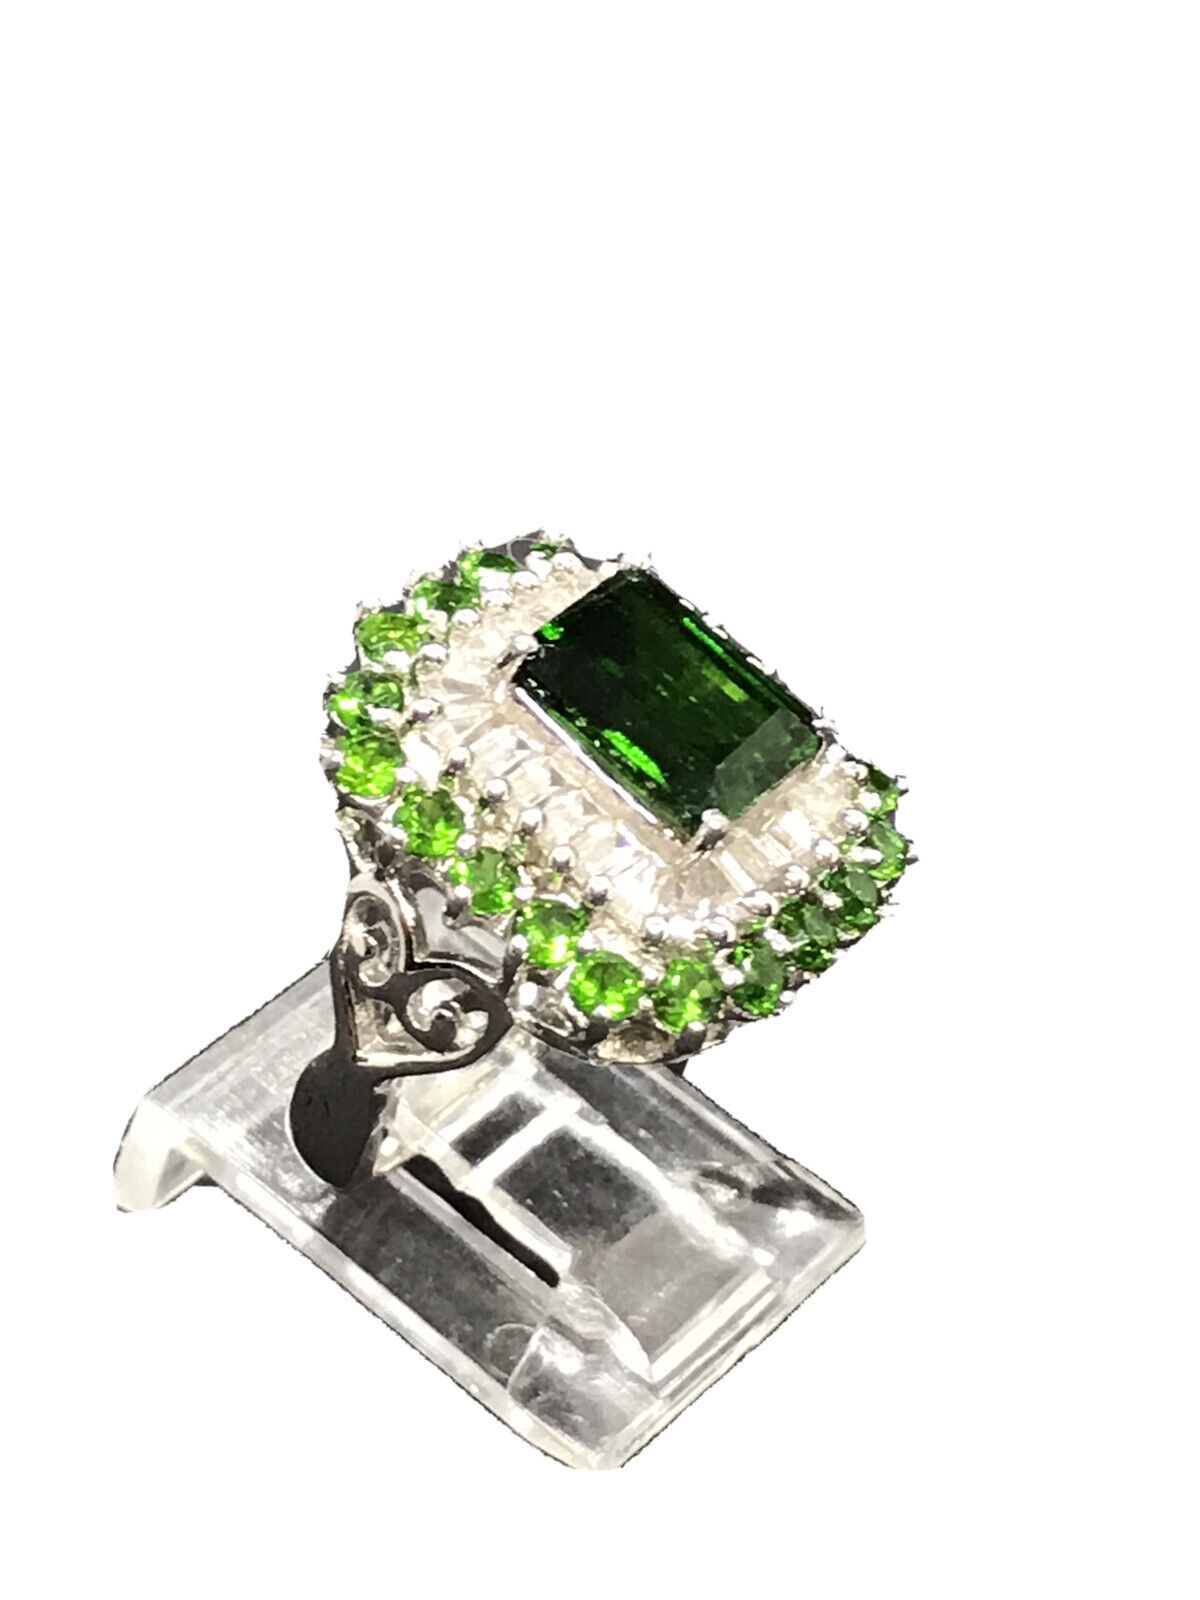 size 10 Lovely RING with Russian Diopside /& Clear Zircon